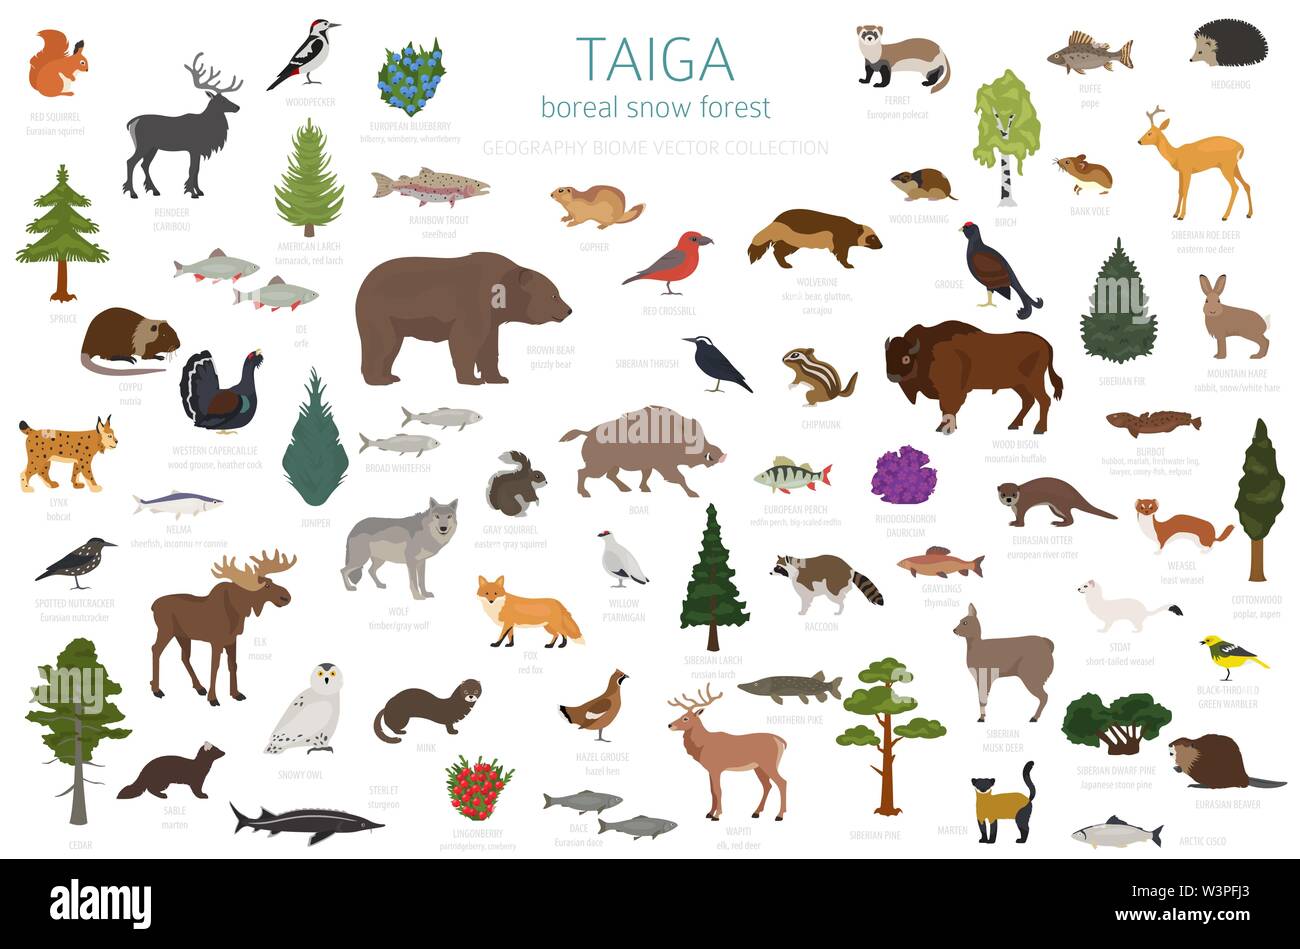 Taiga Biome, Boreal Snow Forest. Terrestrial Ecosystem World Map. Animals,  Birds, Fish And Plants Infographic Design. Vector Illustration Royalty Free  SVG, Cliparts, Vectors, and Stock Illustration. Image 119691879.